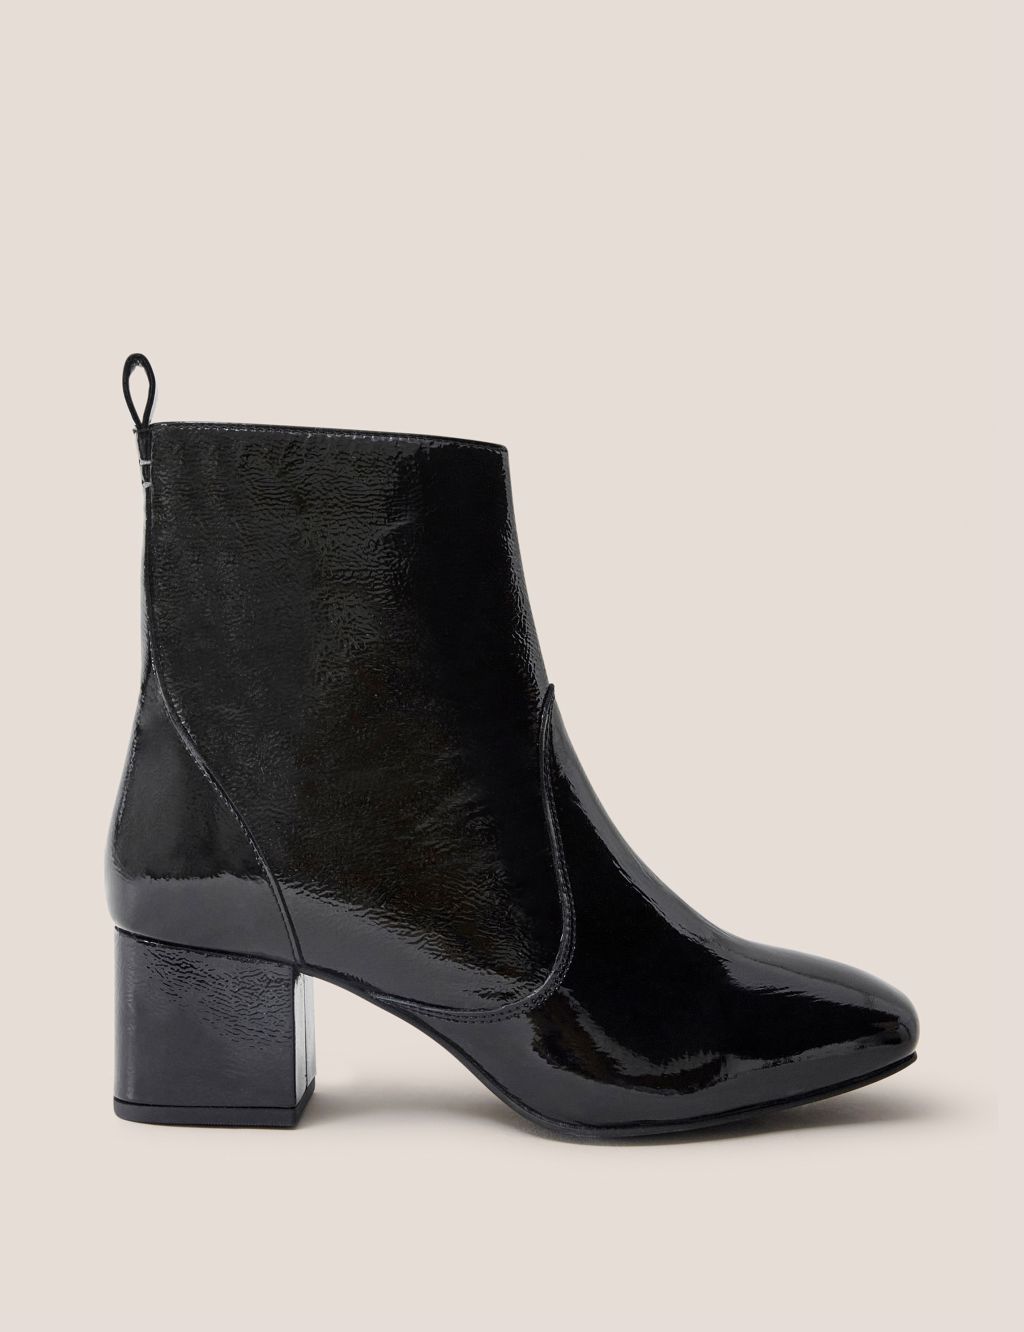 Leather Block Heel Ankle Boots image 1